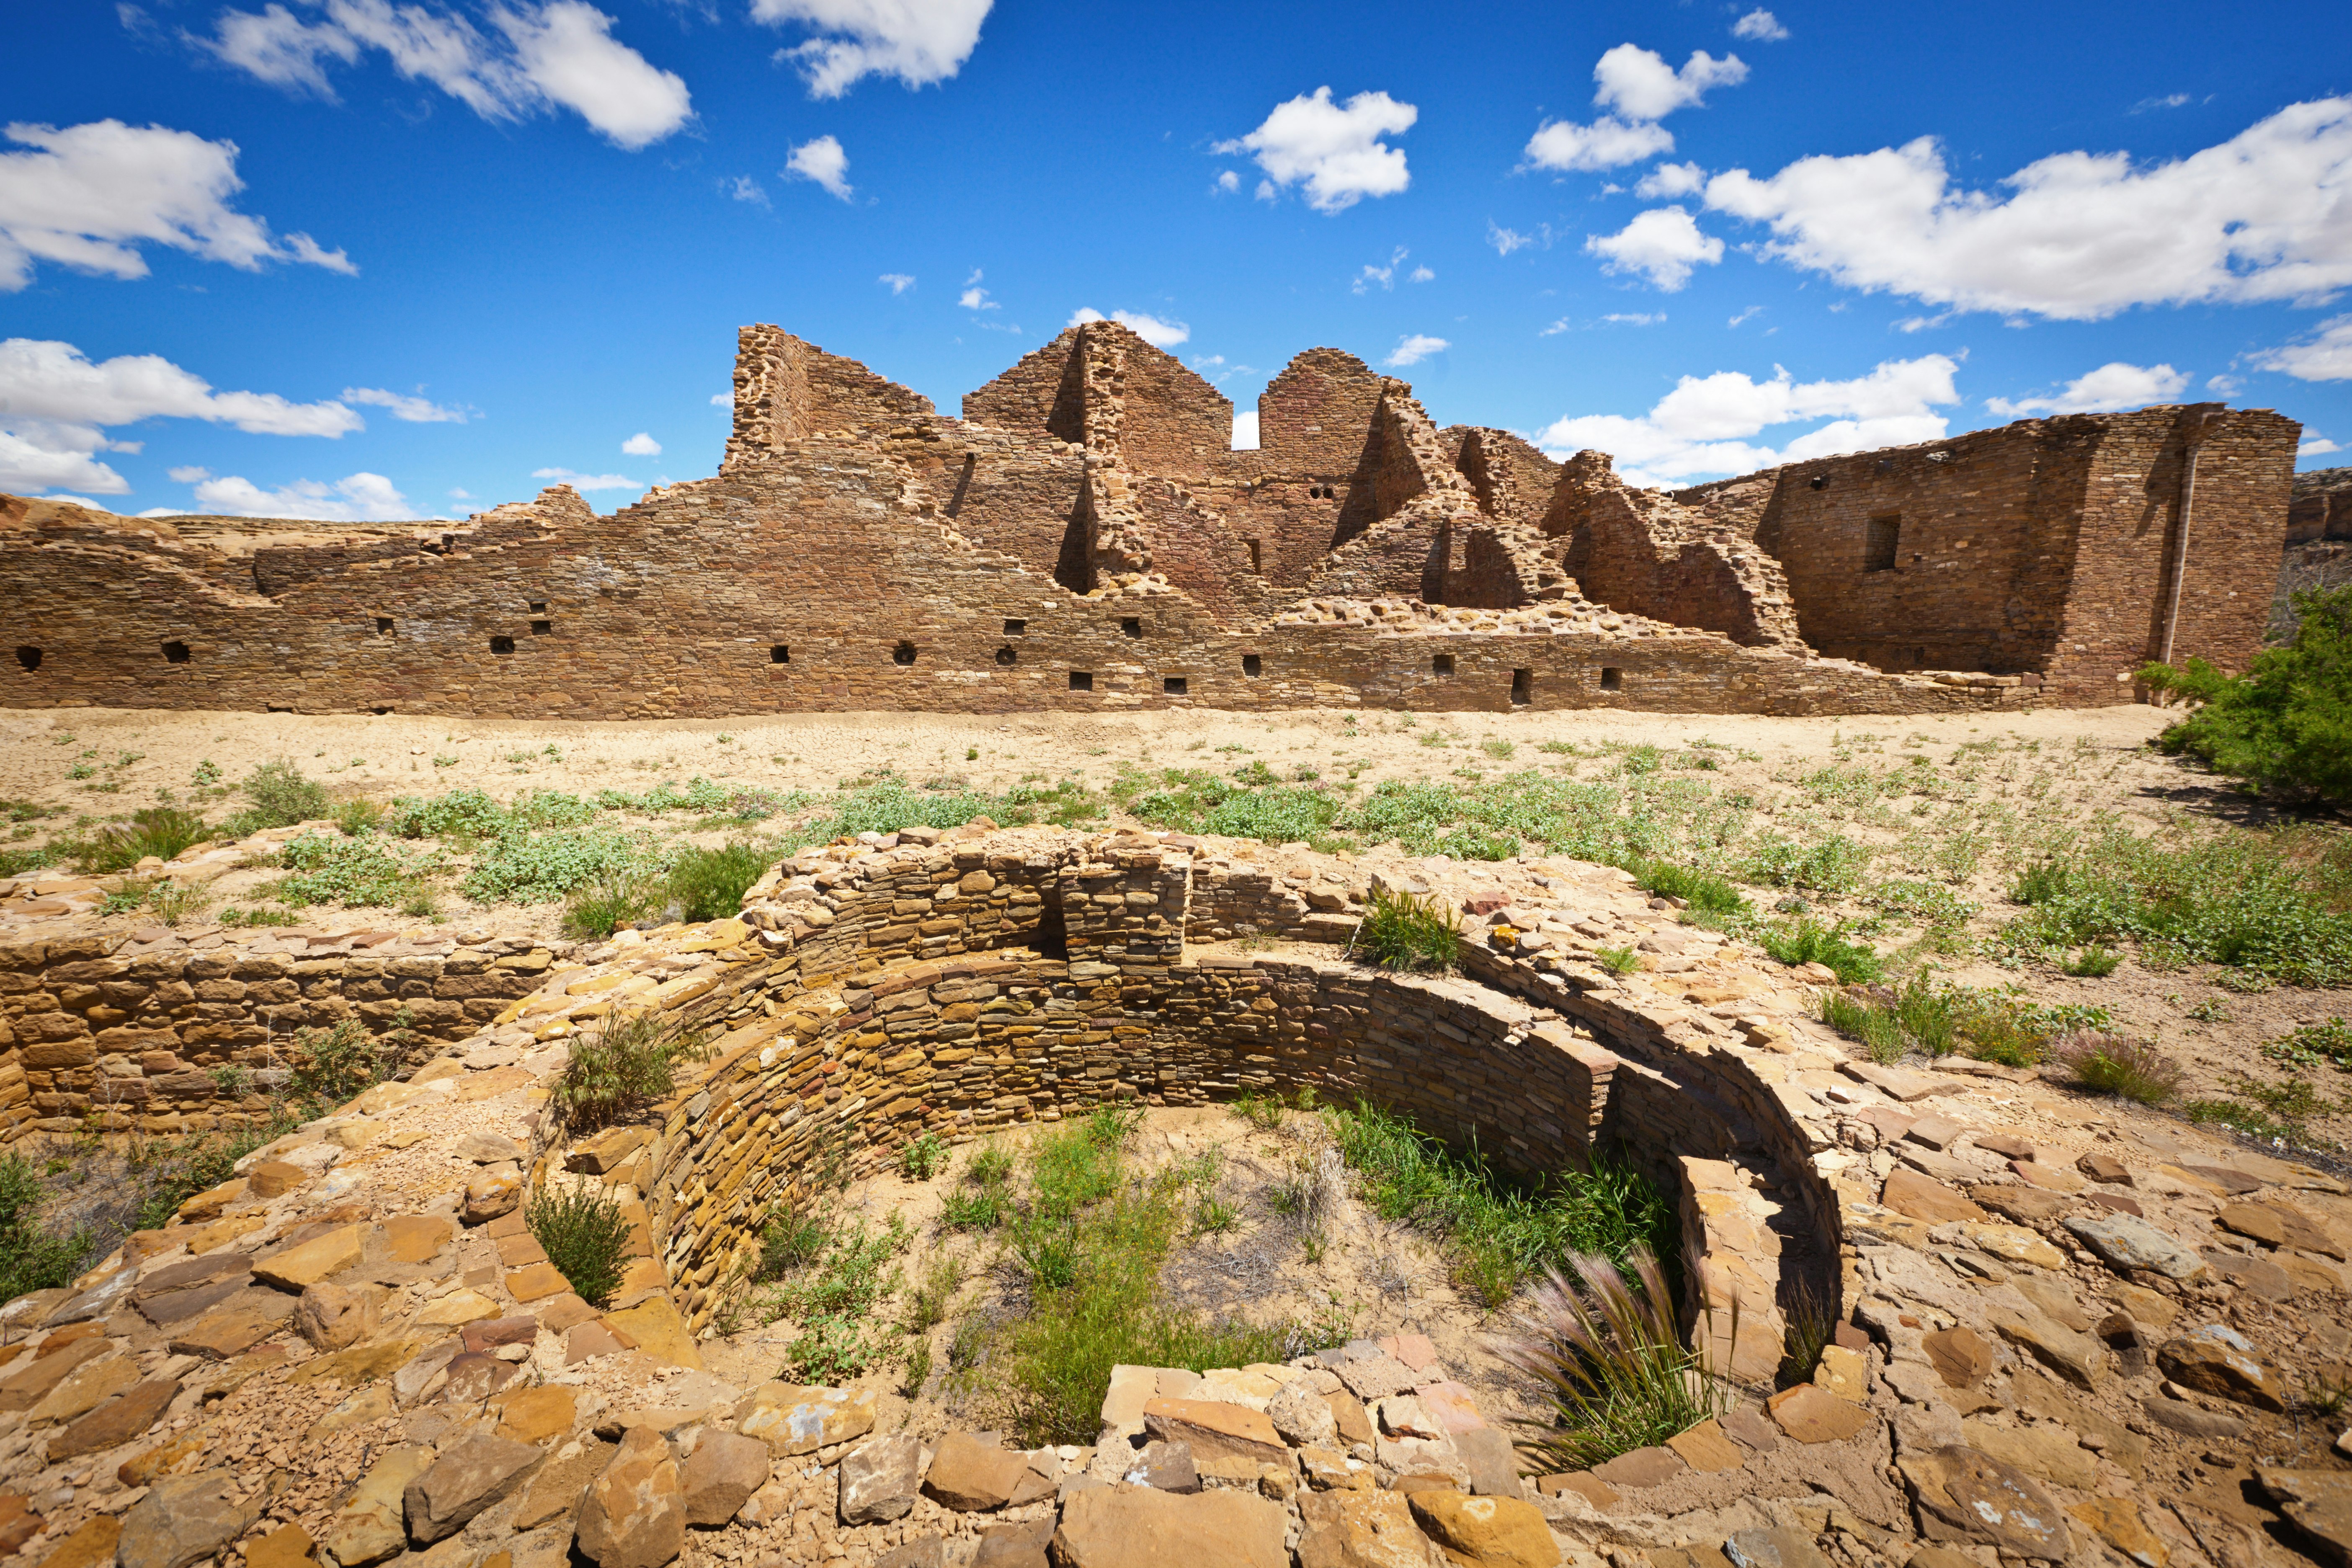 Stone ruins of homes, food storages and villages at Casa Rinconada in Chaco Canyon National Park